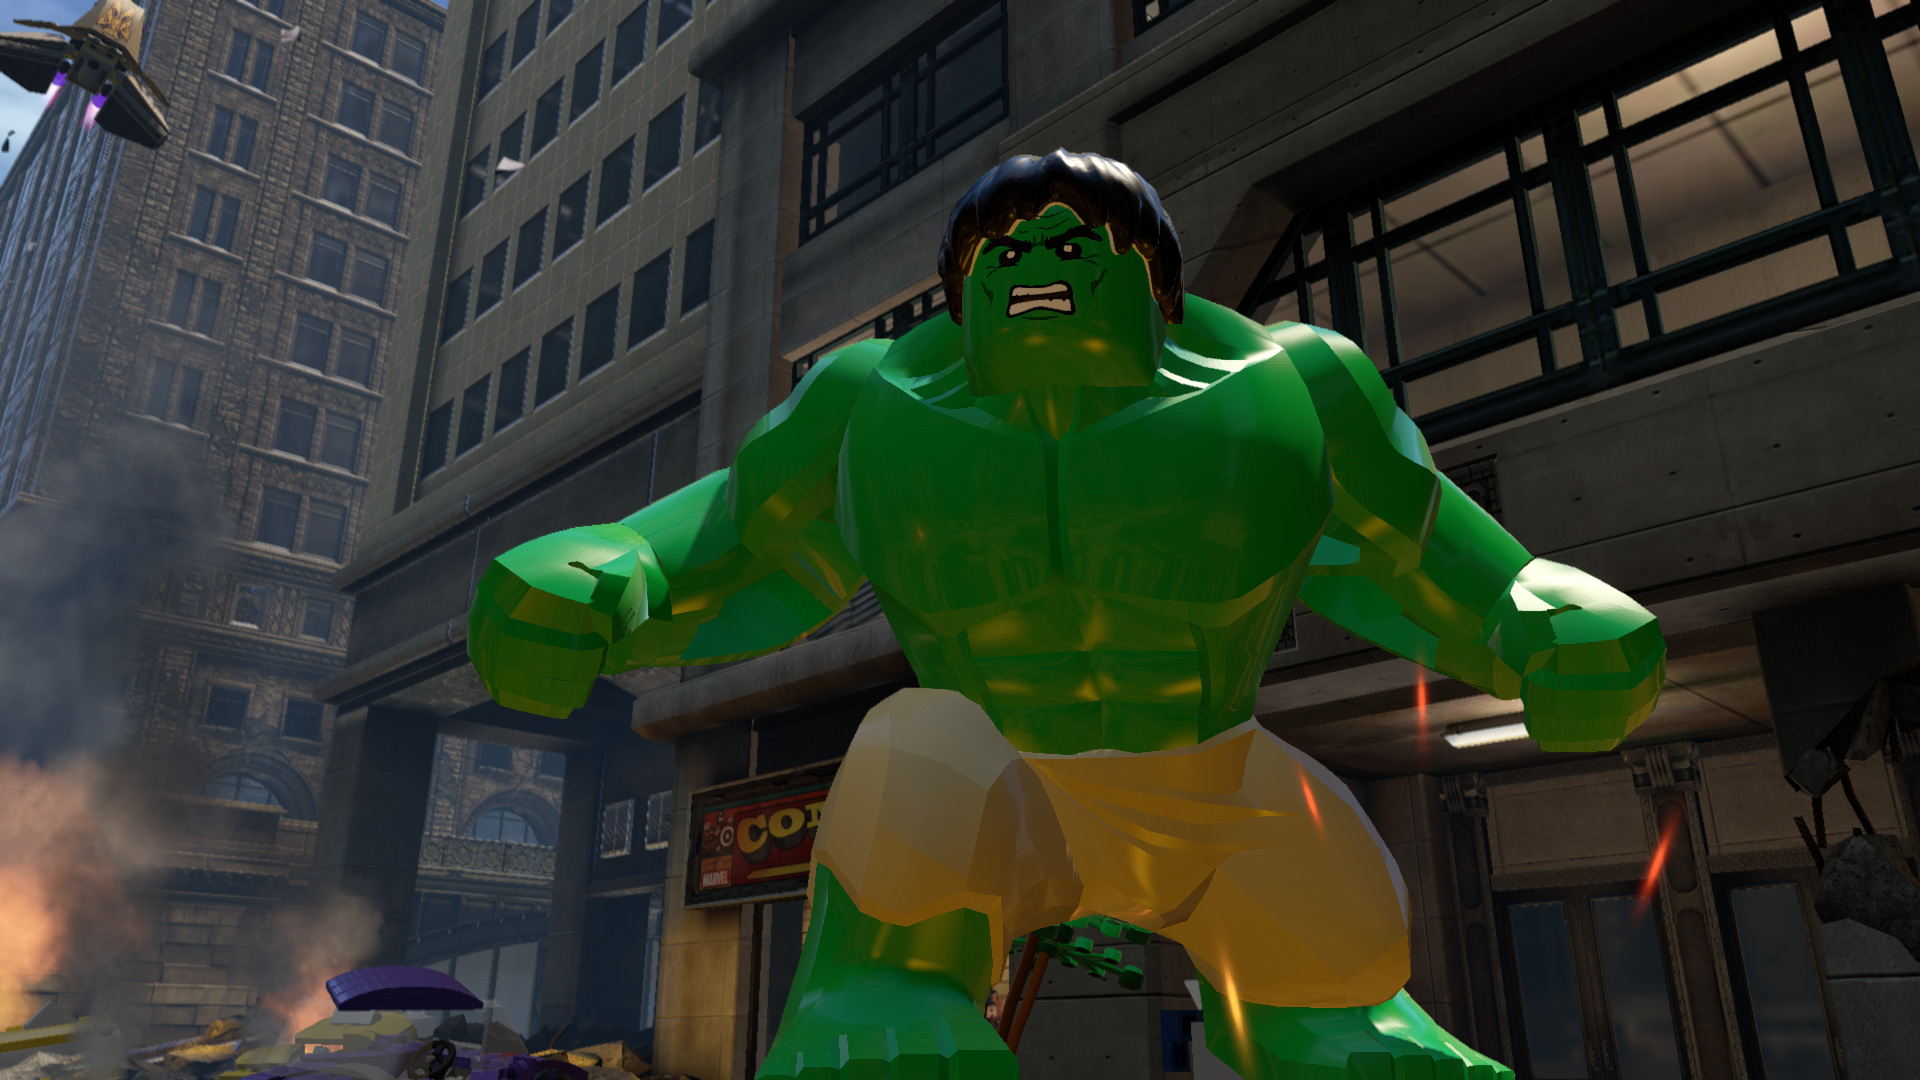 Lego Marvel Collection' Coming to PS4, Xbox One in March